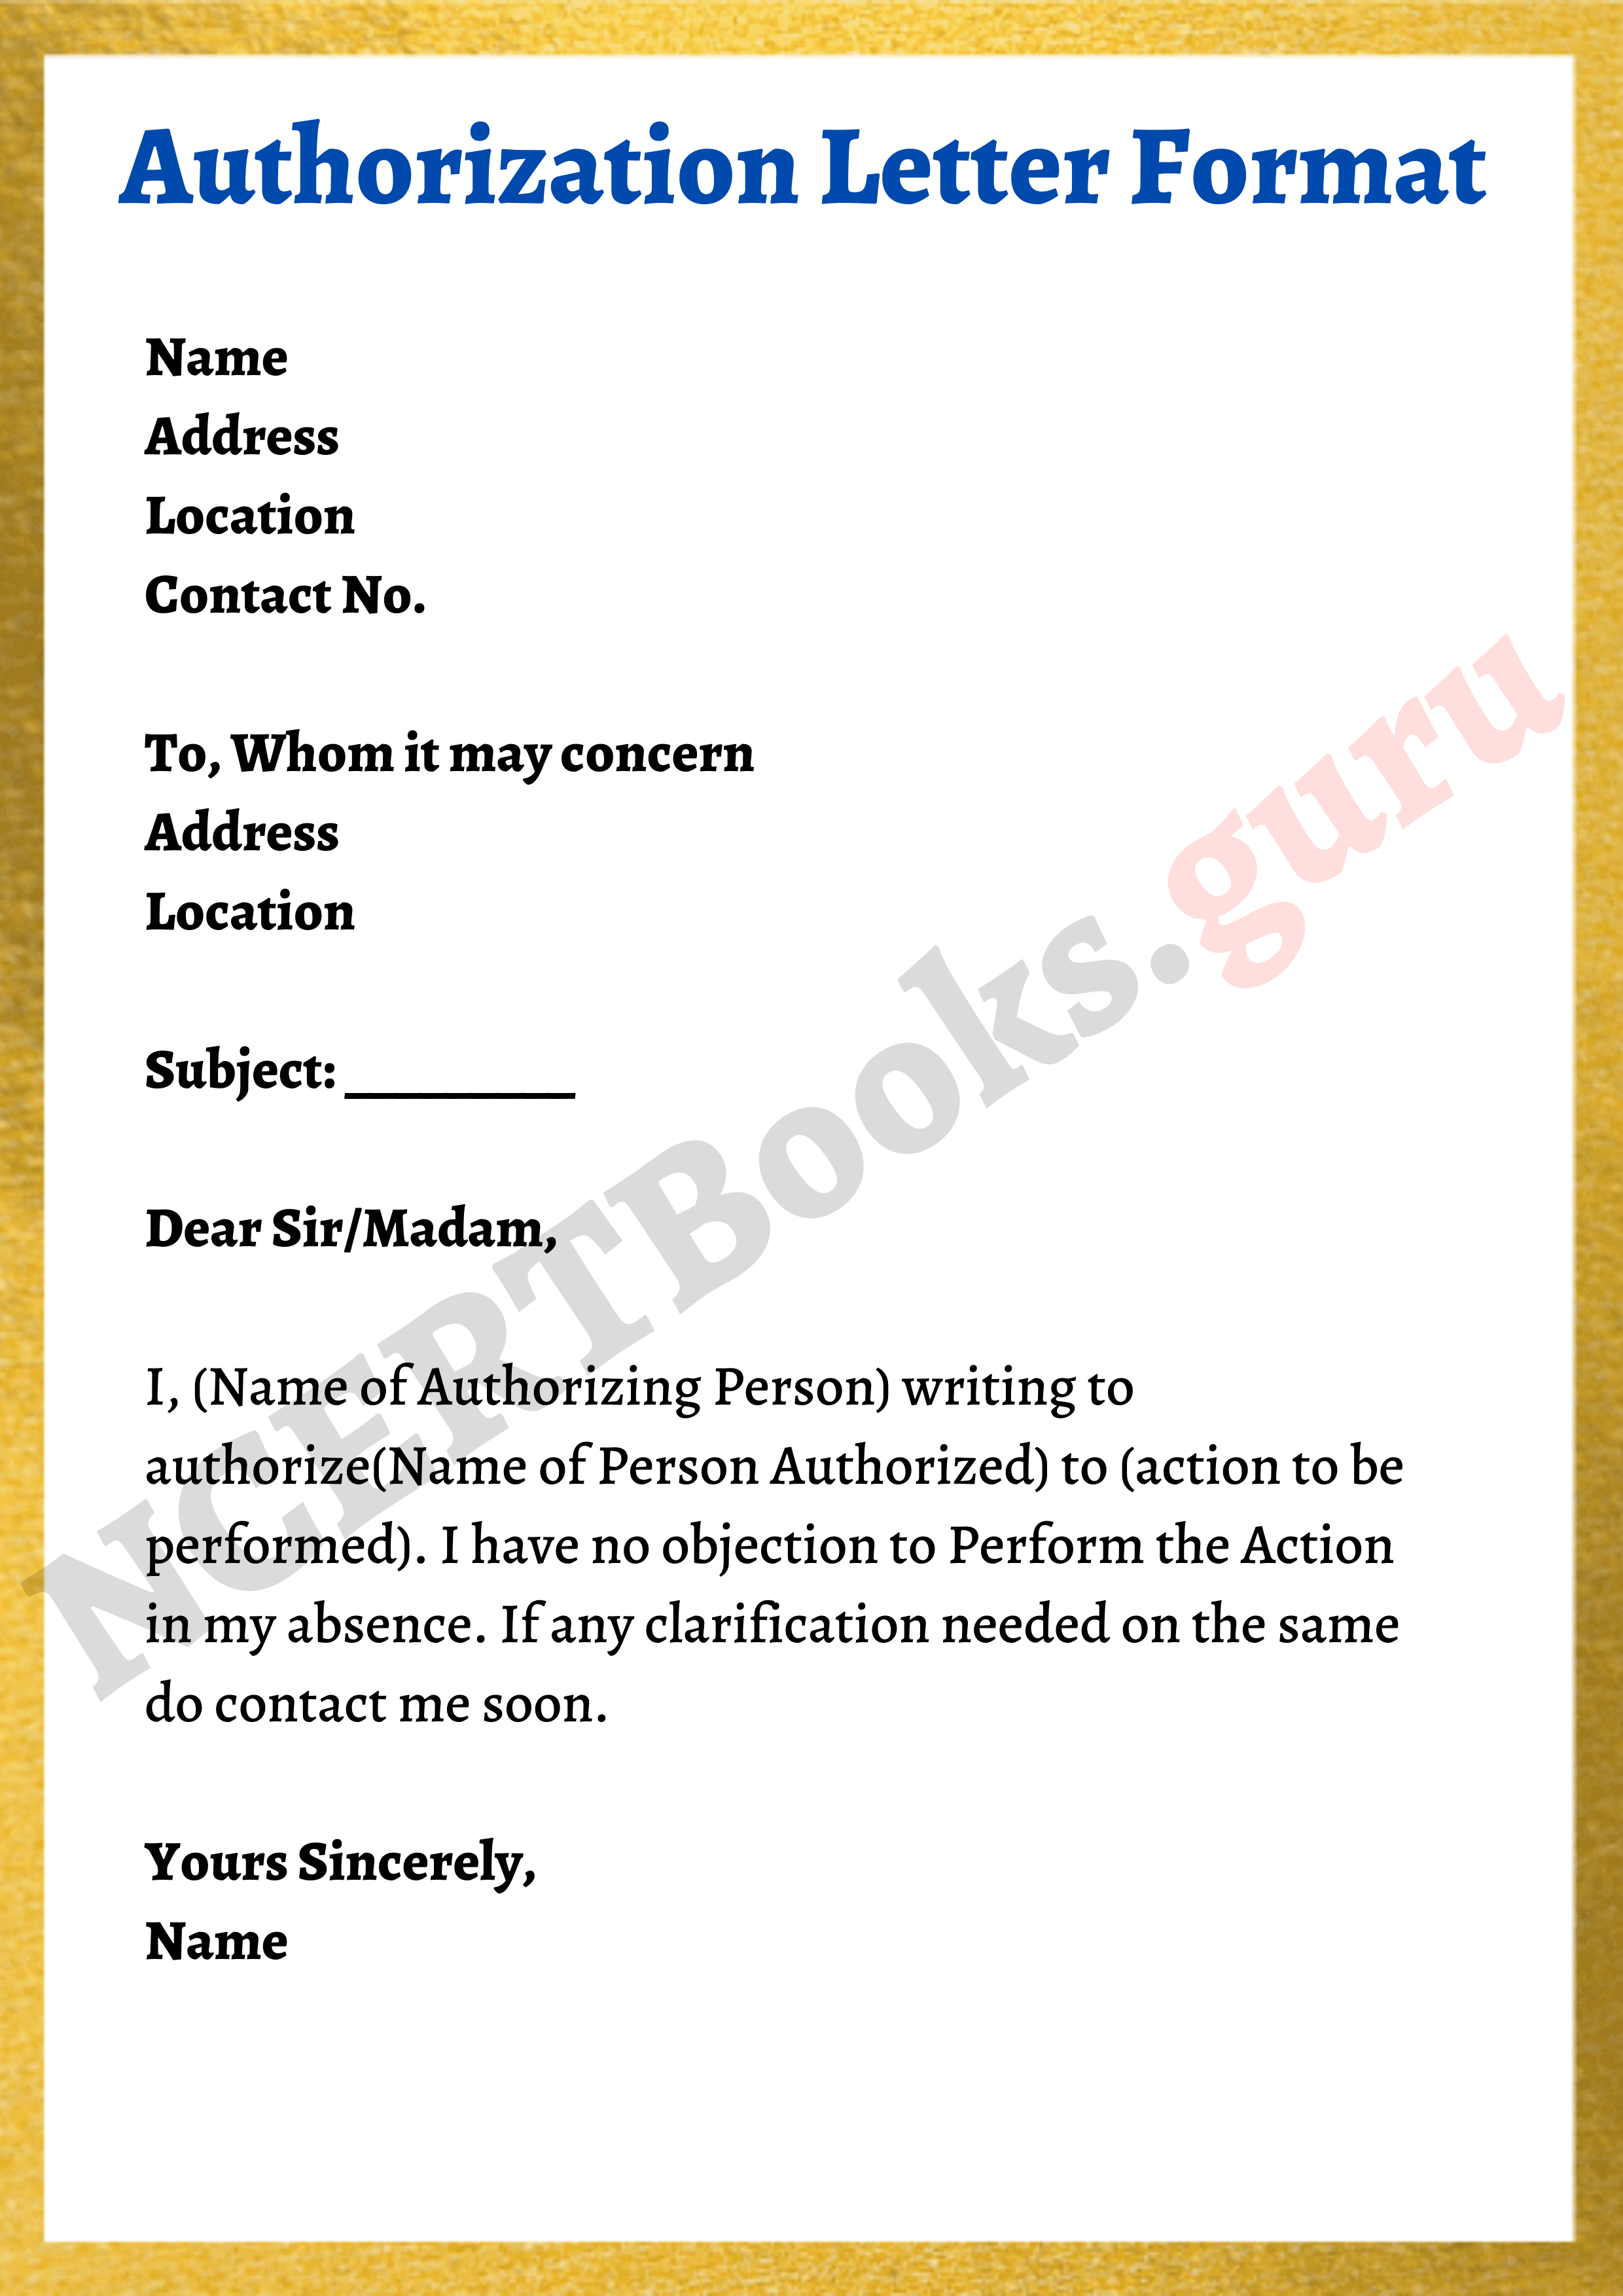 authorization letter template, samples | how to write an letter? ba resume examples manager cv example